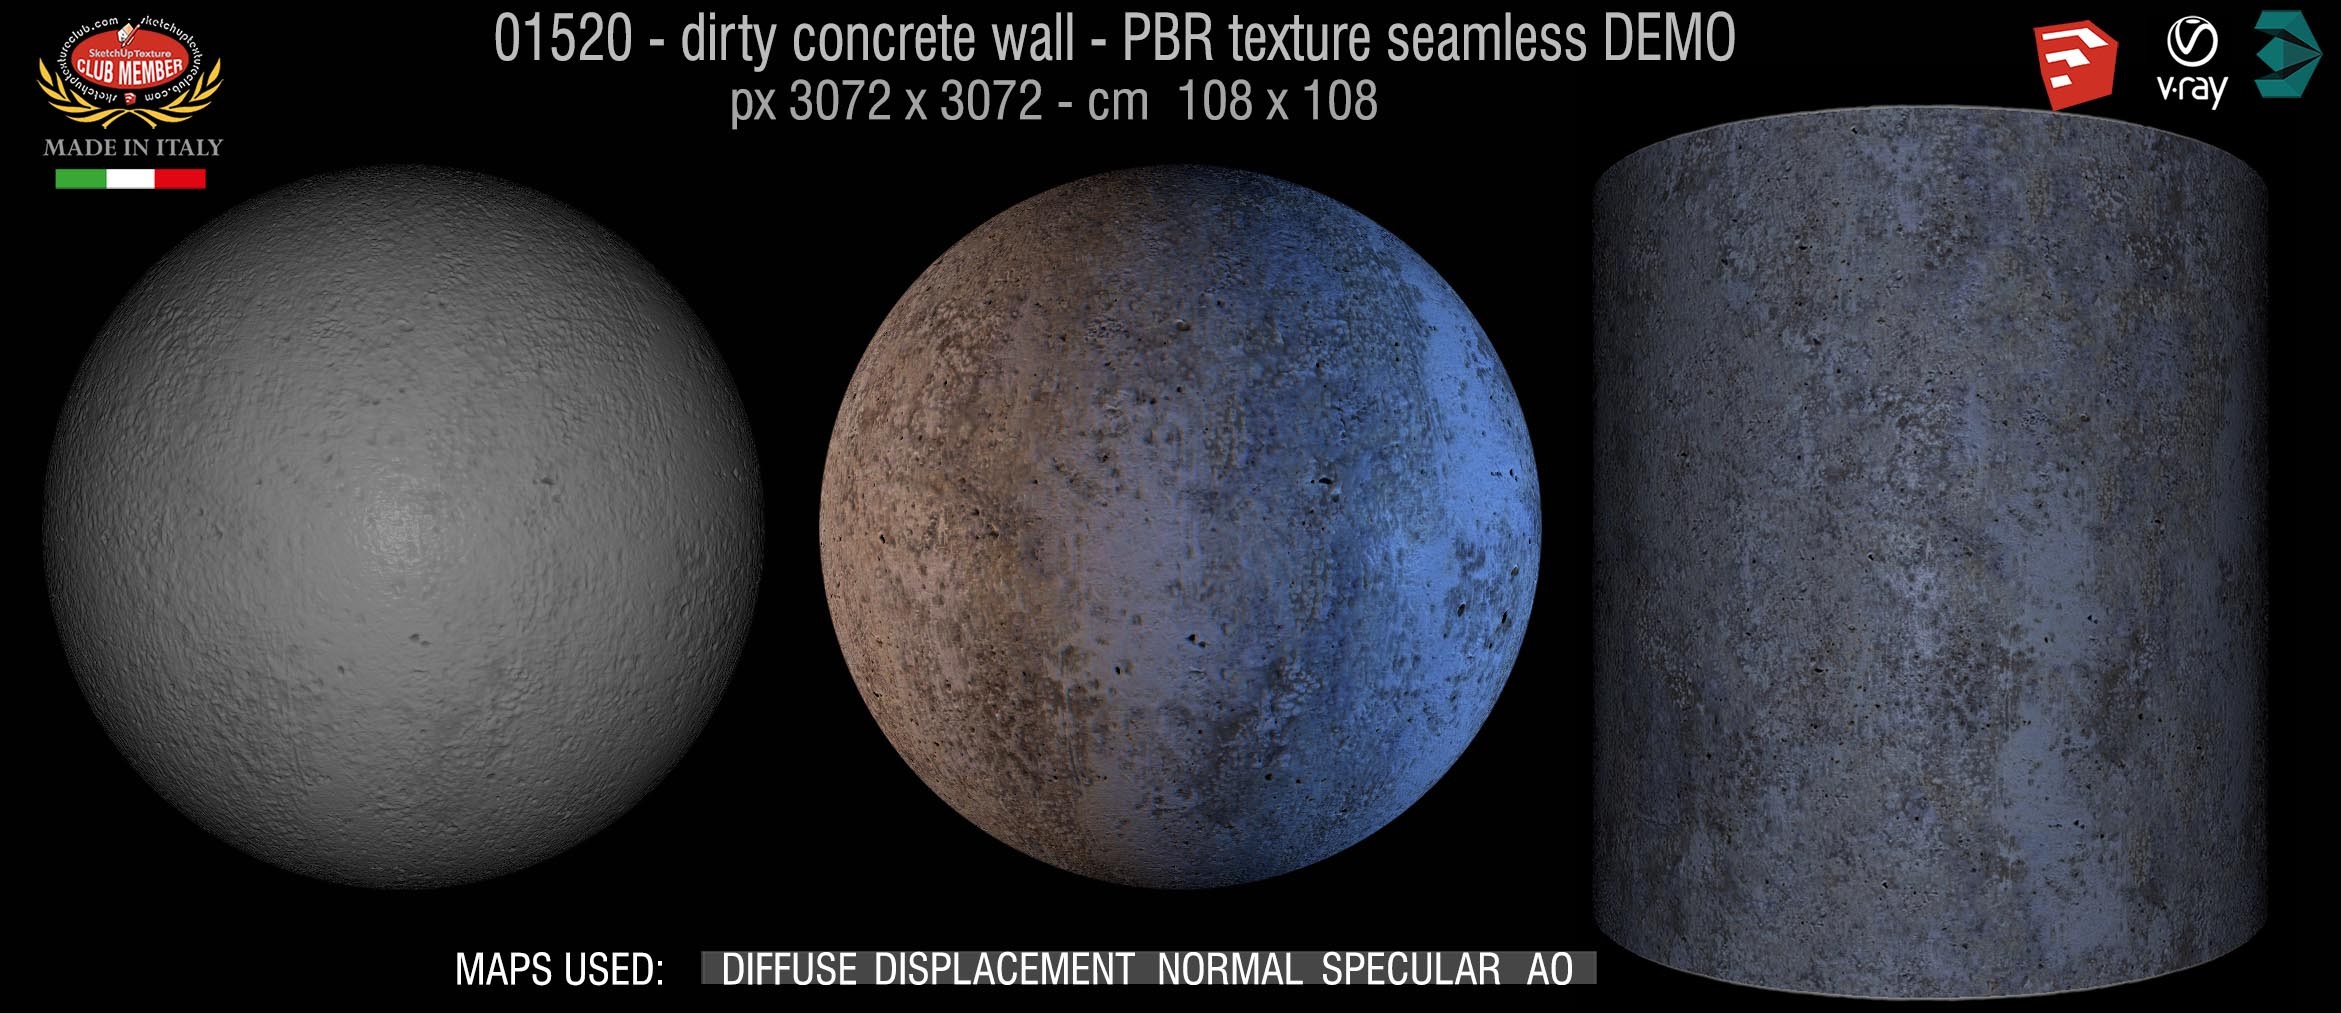 01520 Concrete bare dirty wall PBR texture seamless DEMO